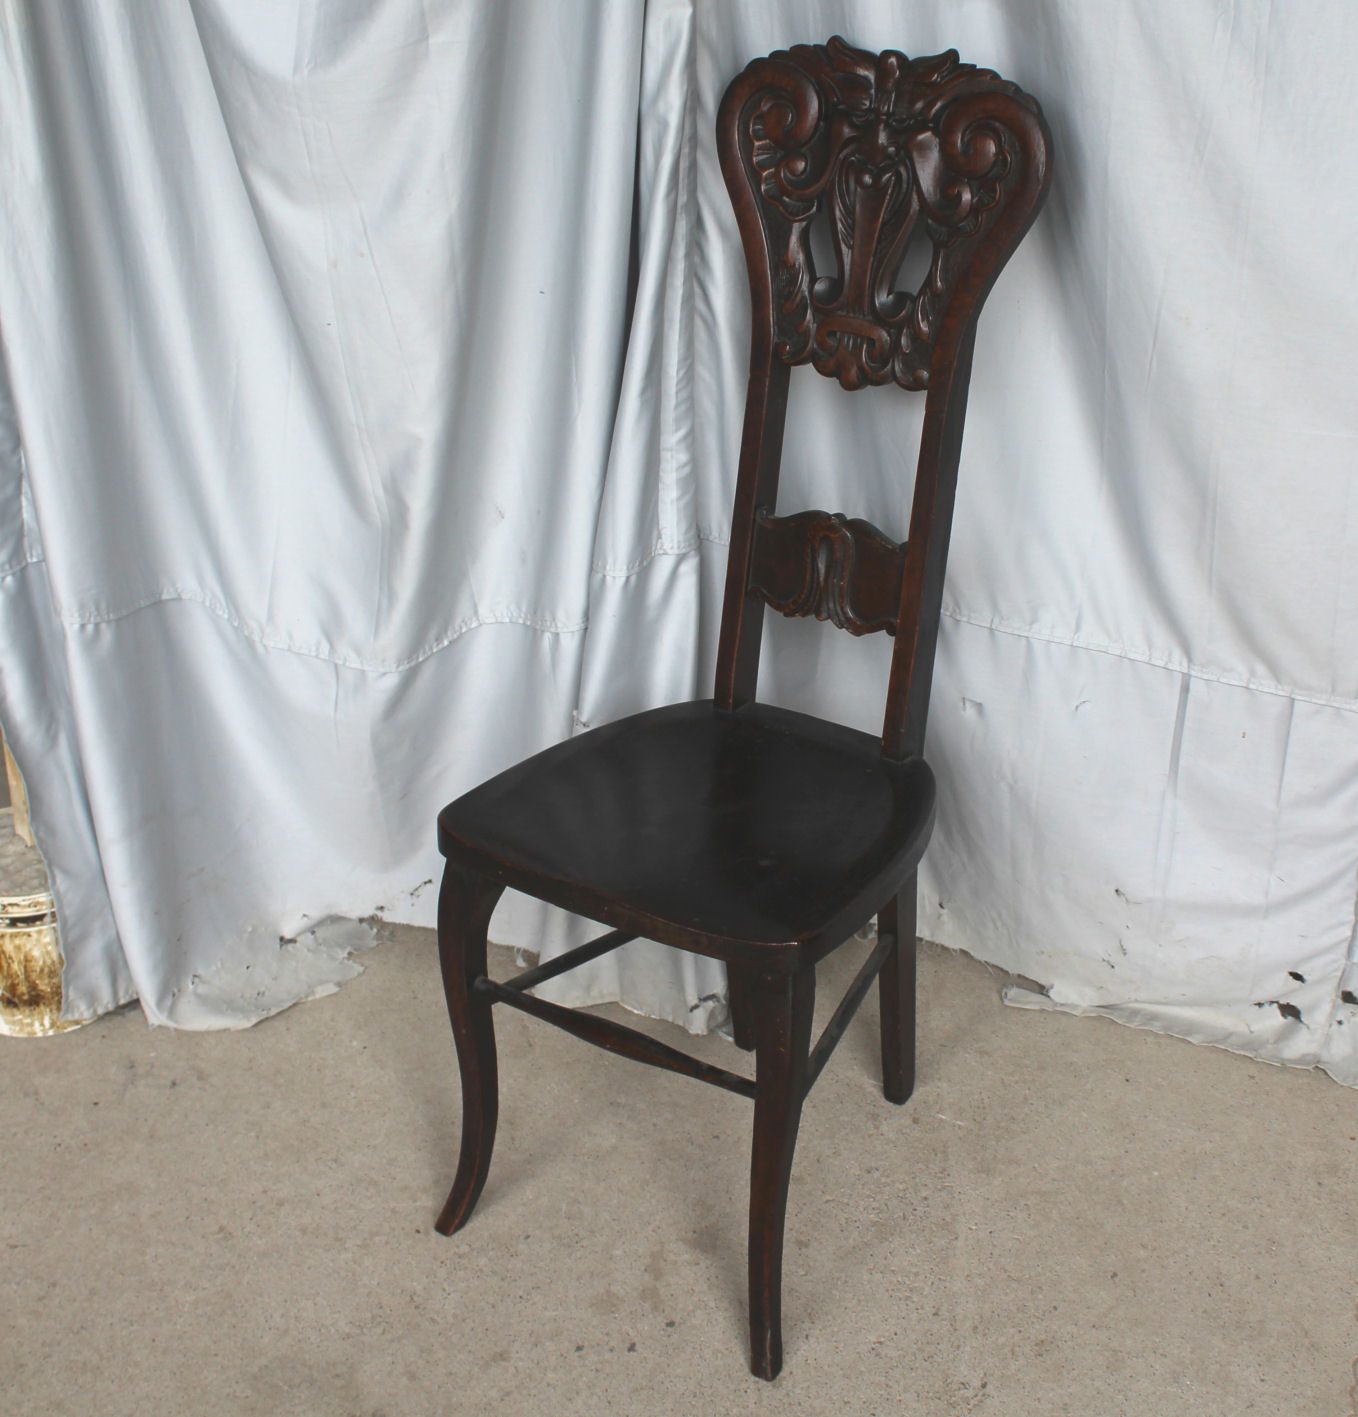 Bargain John S Antiques Antique Oak Vanity Chair With Carved